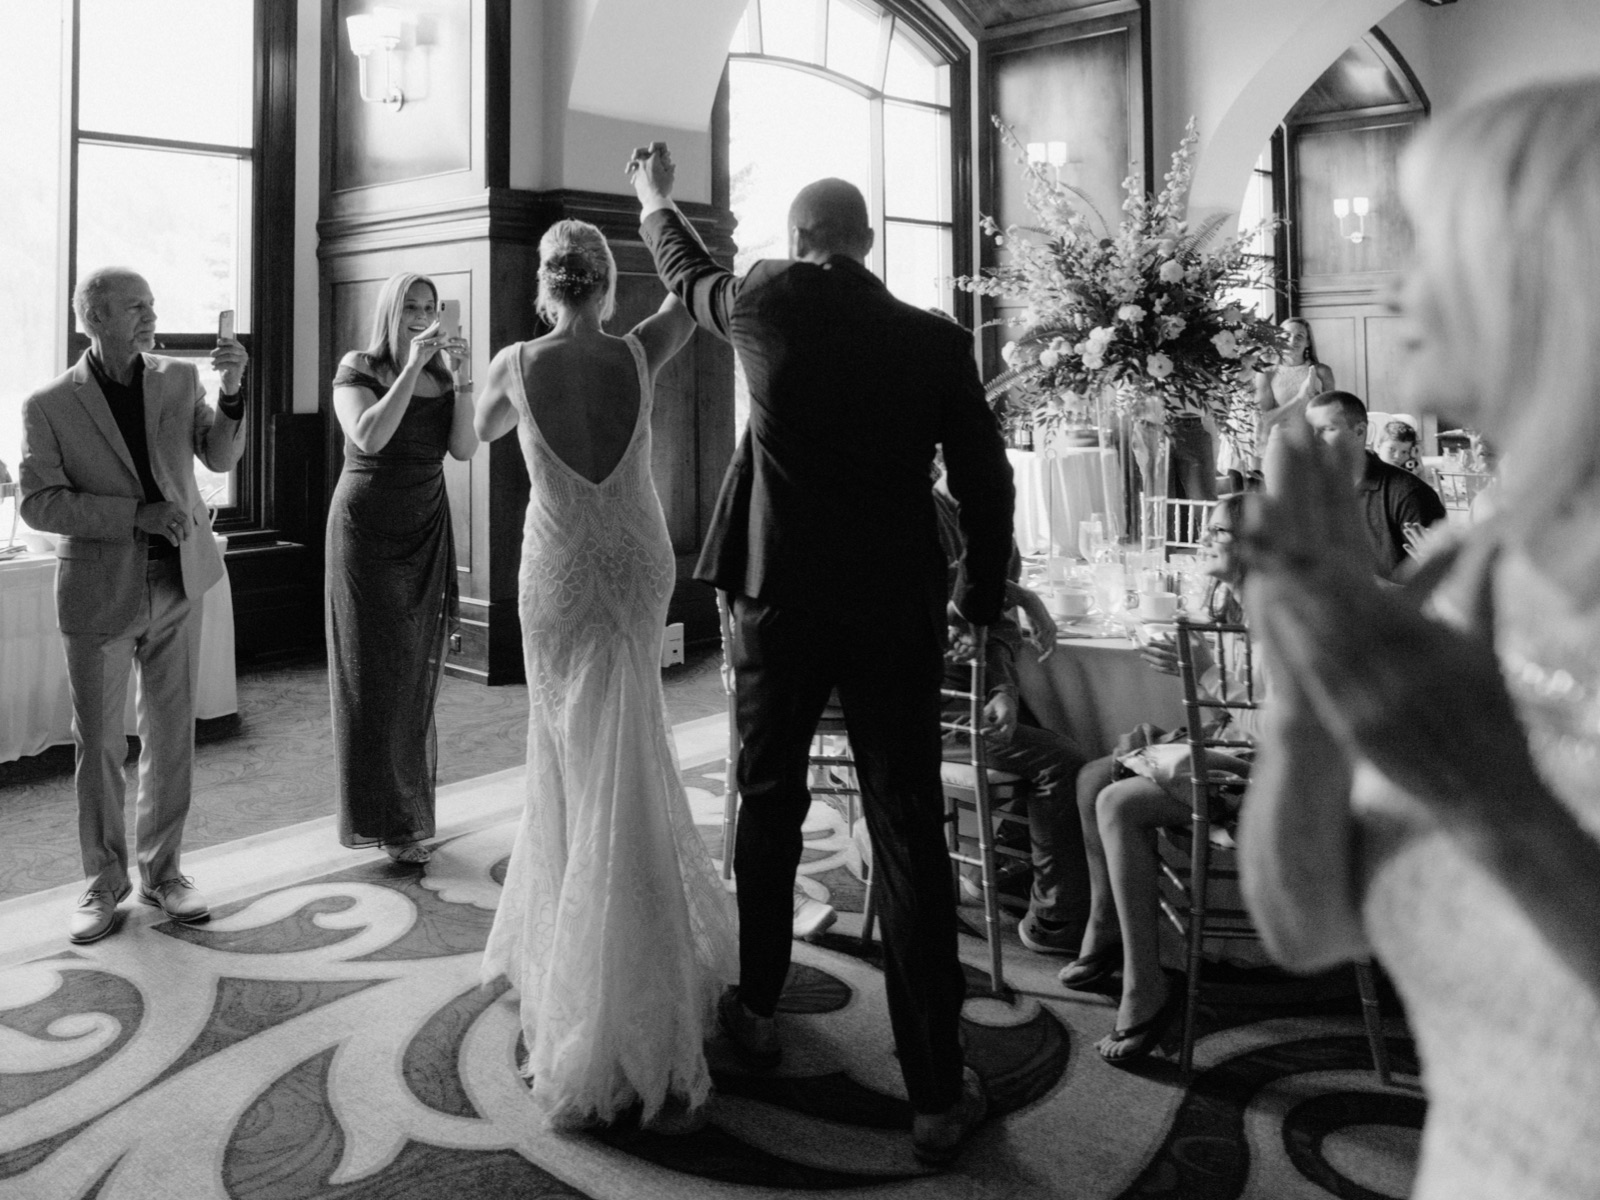 Grand entrance with guests applauding into the Victoria Ballroom for a wedding reception